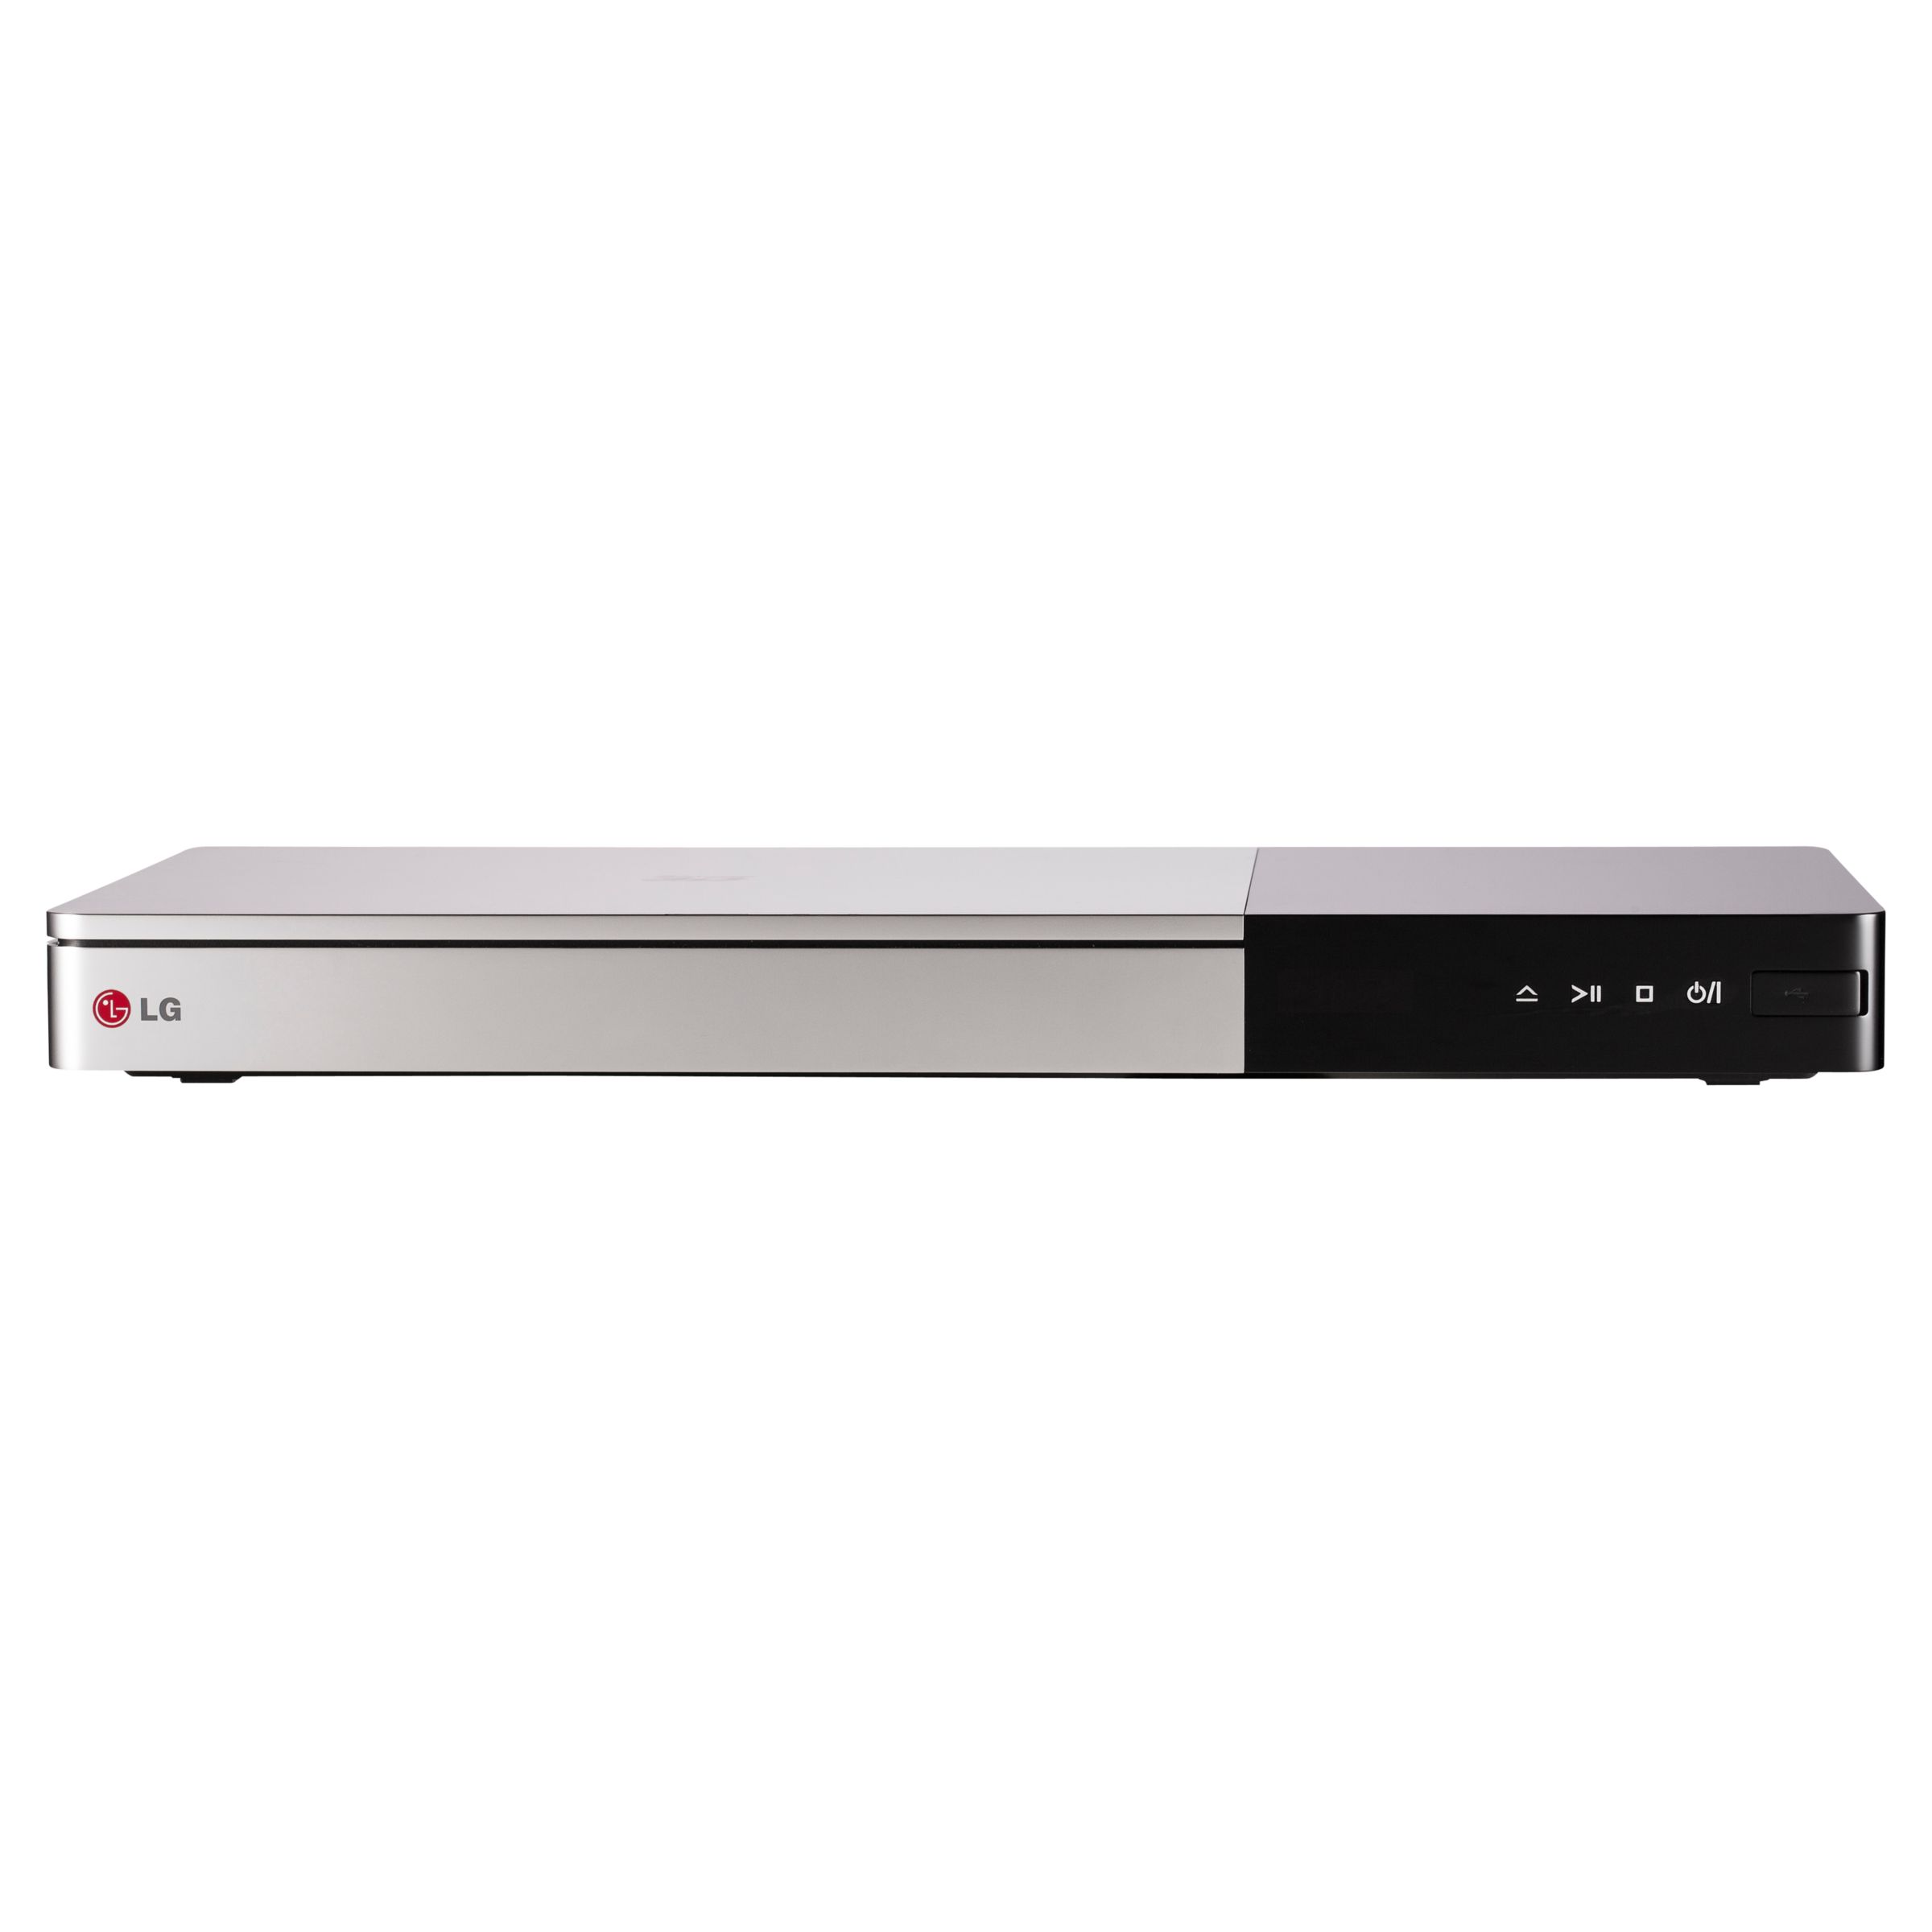 Lg Bp740 Smart 3d 4k Ultra Hd Blu Ray Dvd Player With Nfc And Magic Remote At John Lewis Partners